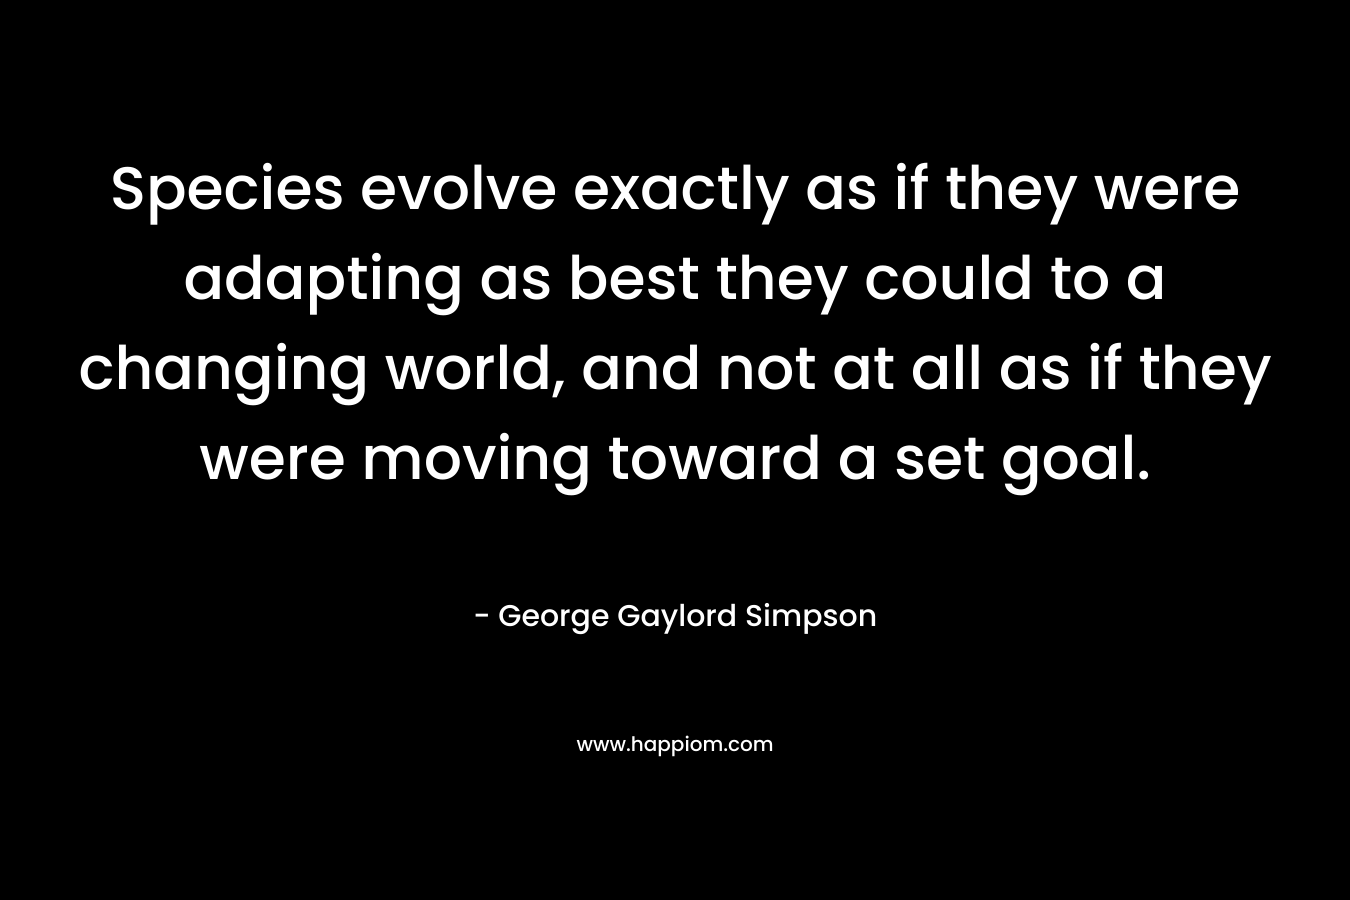 Species evolve exactly as if they were adapting as best they could to a changing world, and not at all as if they were moving toward a set goal. – George Gaylord Simpson